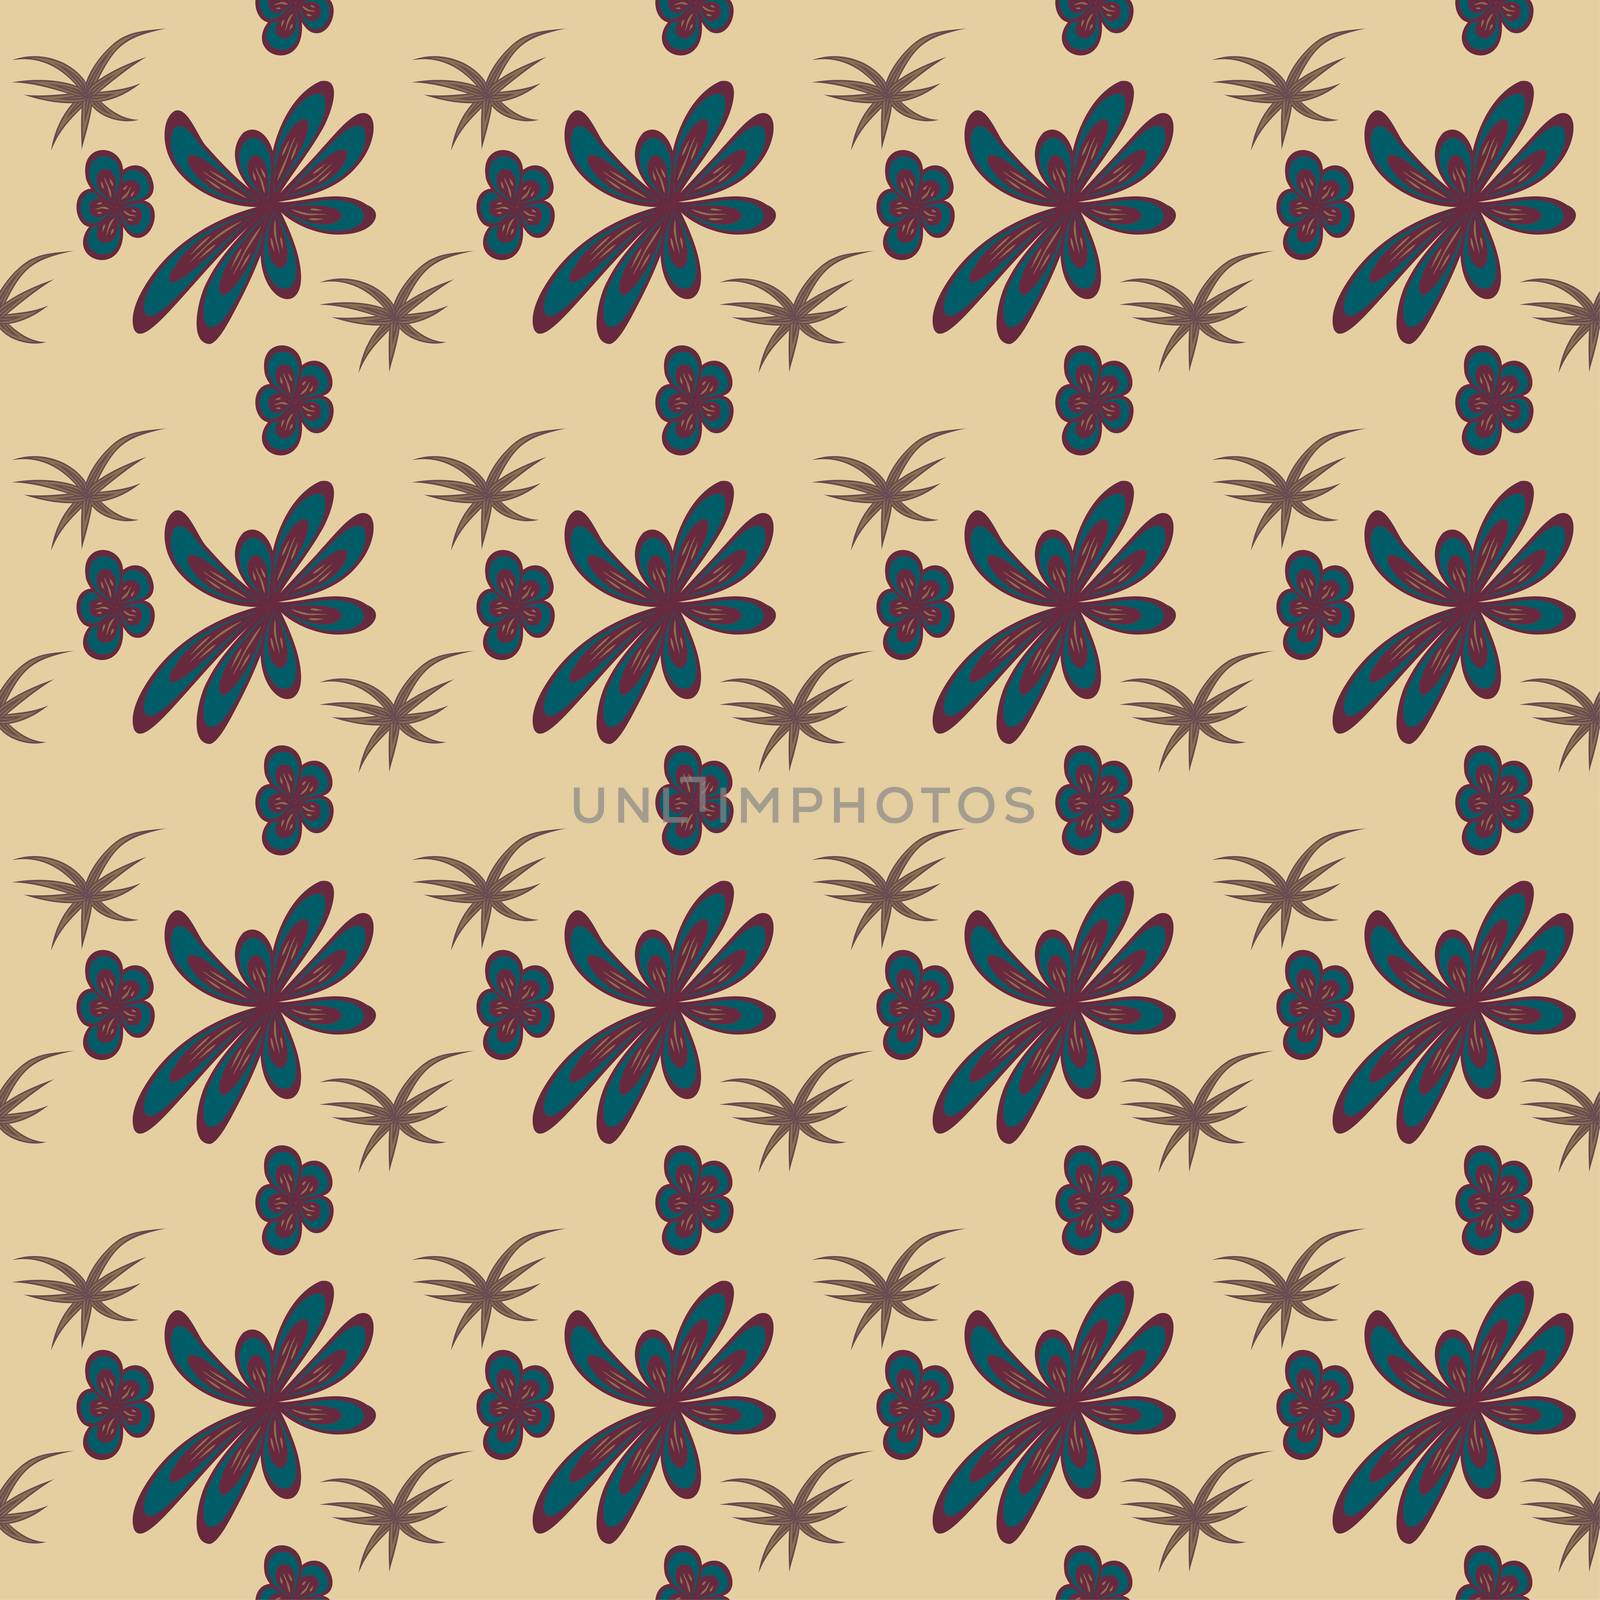 Elegant pattern with stylish flowers and leaves. Seamless template can be used for design fabric, cover, linens and more designs.